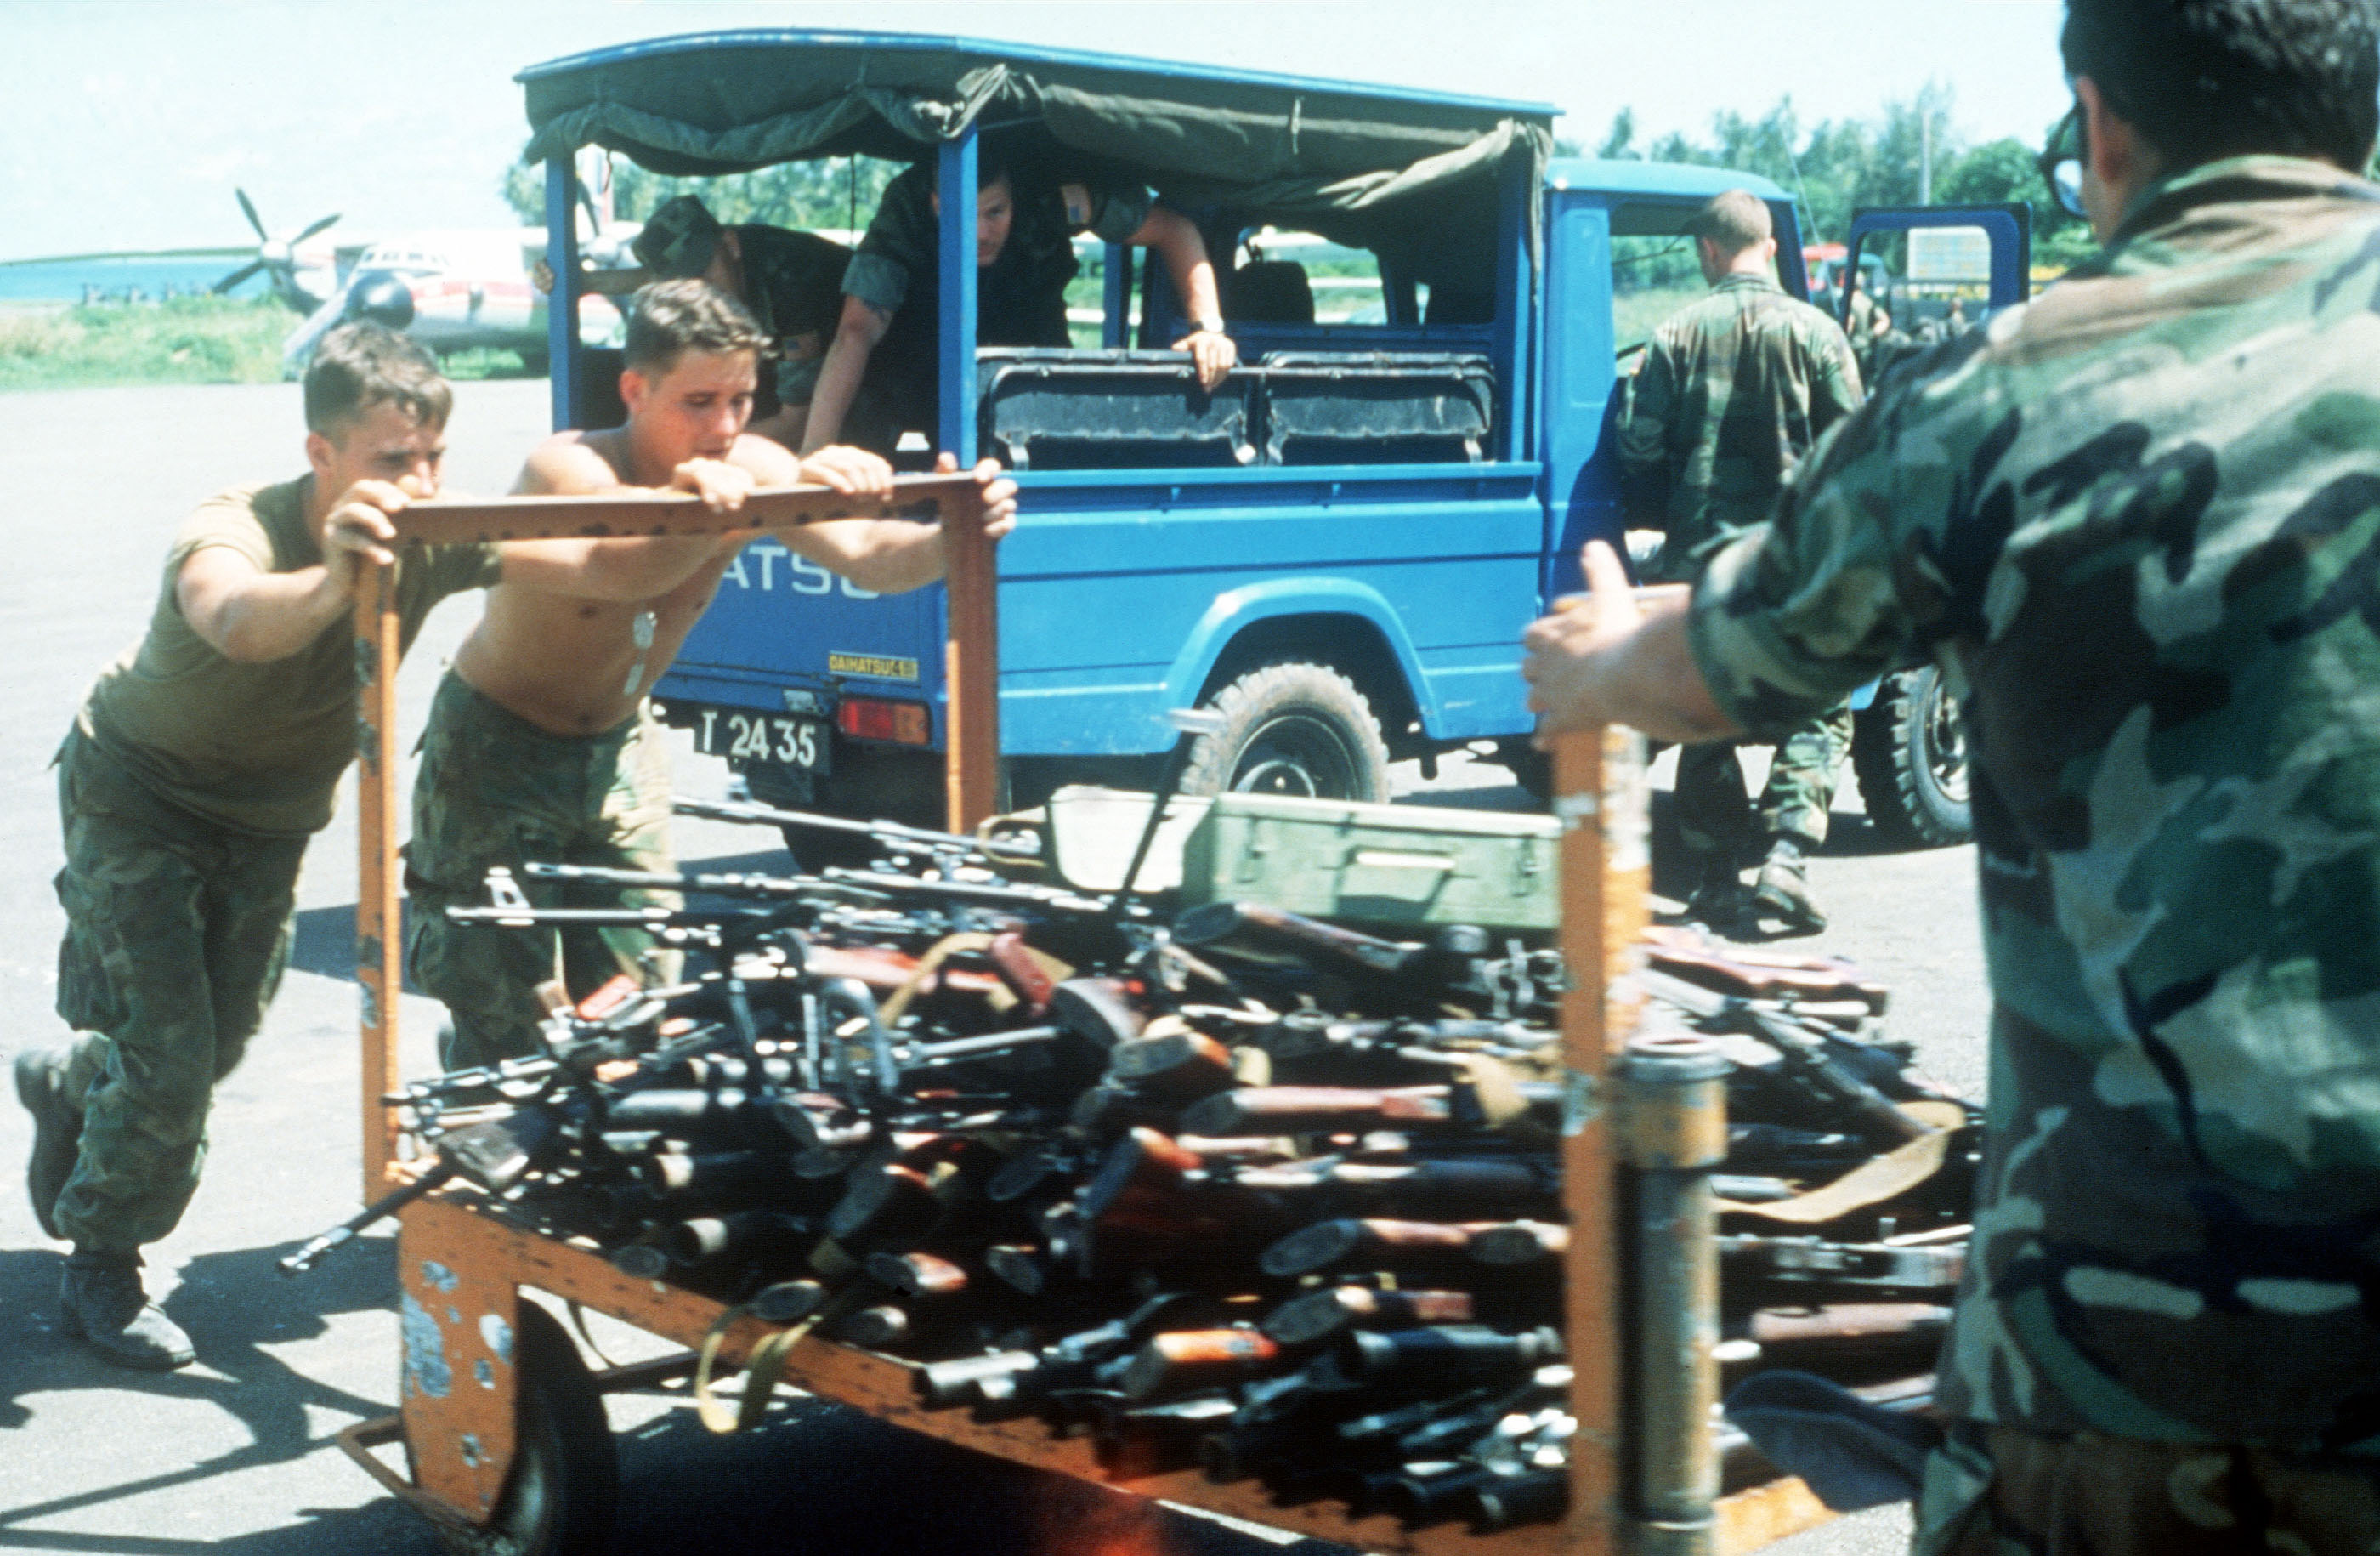 us-military-personnel-push-a-cart-loaded-with-weapons-seized-during-operation-800cde.jpg